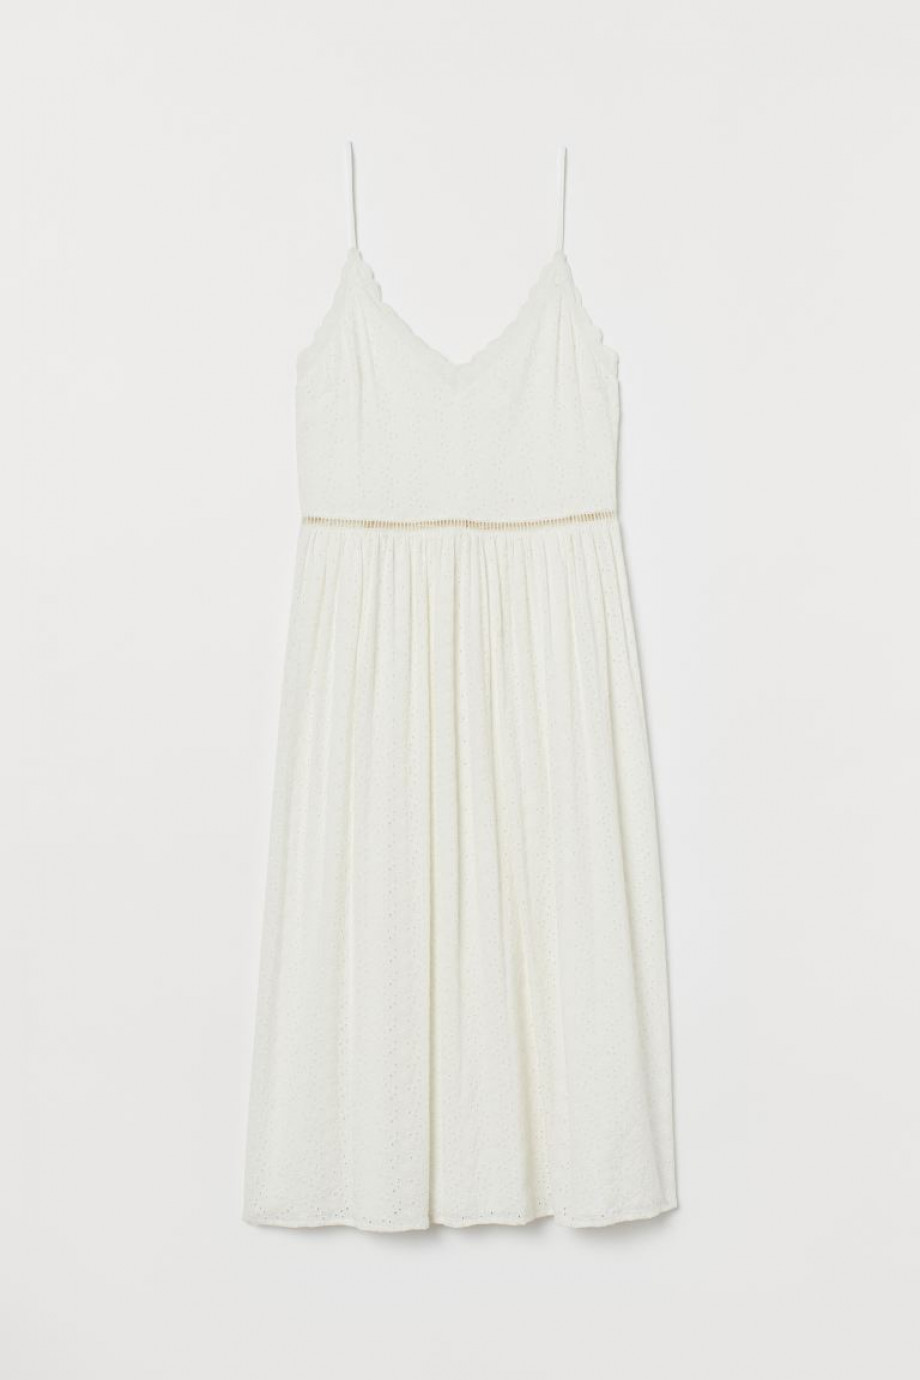 Robe avec broderie anglaise chez H&M